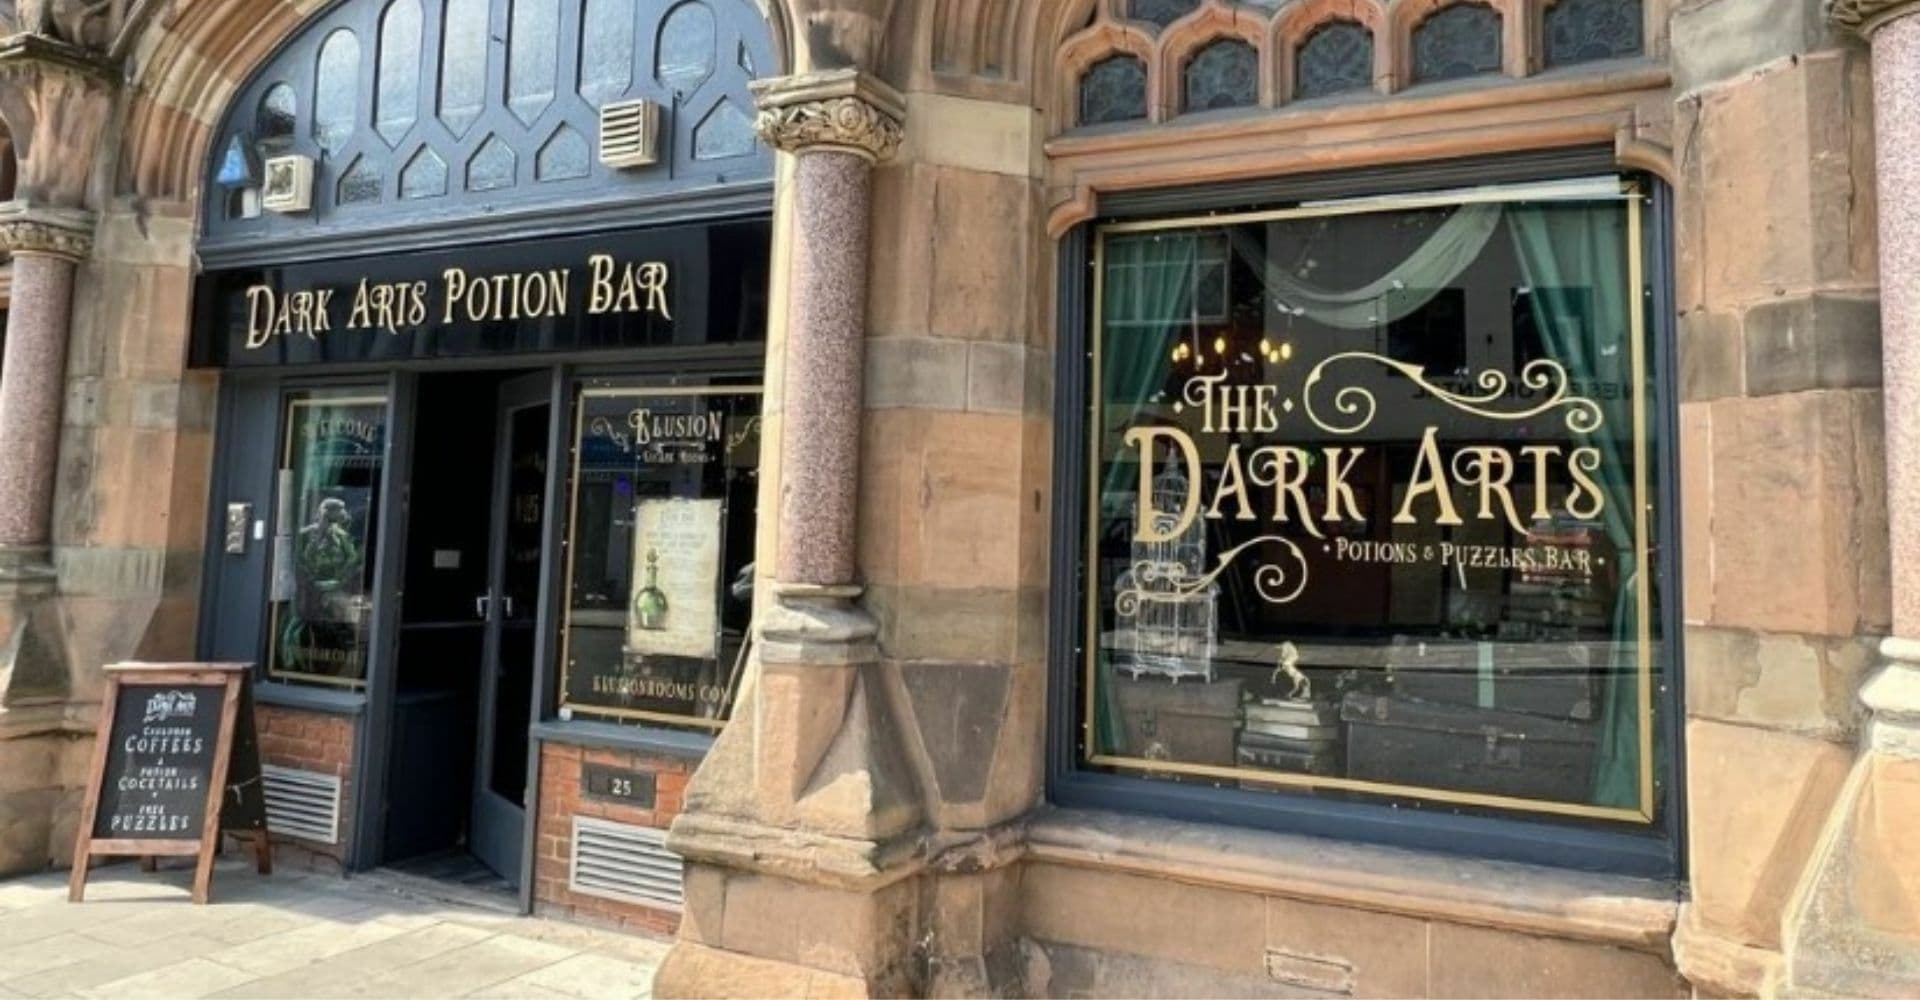 The Dark Arts Potions and Puzzle Bar exterior